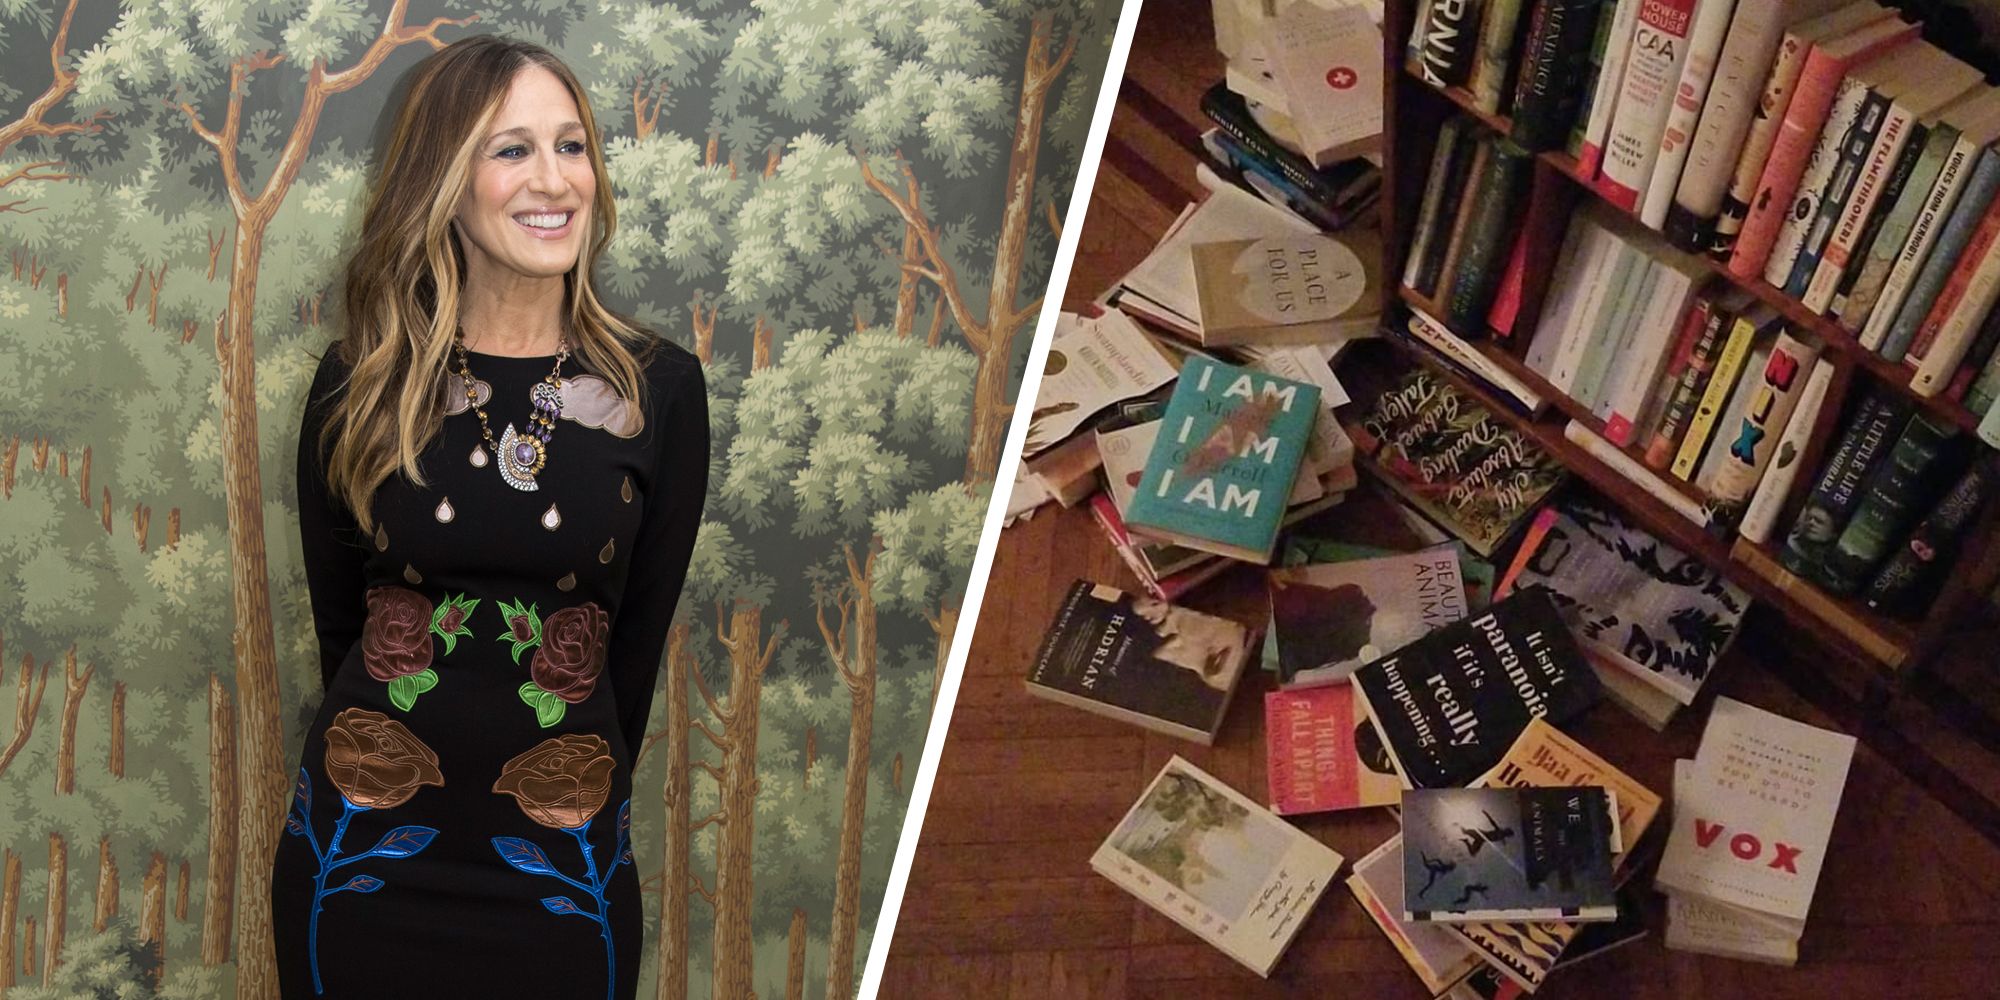 Sarah Jessica Parker filled her own closet with all of Carrie